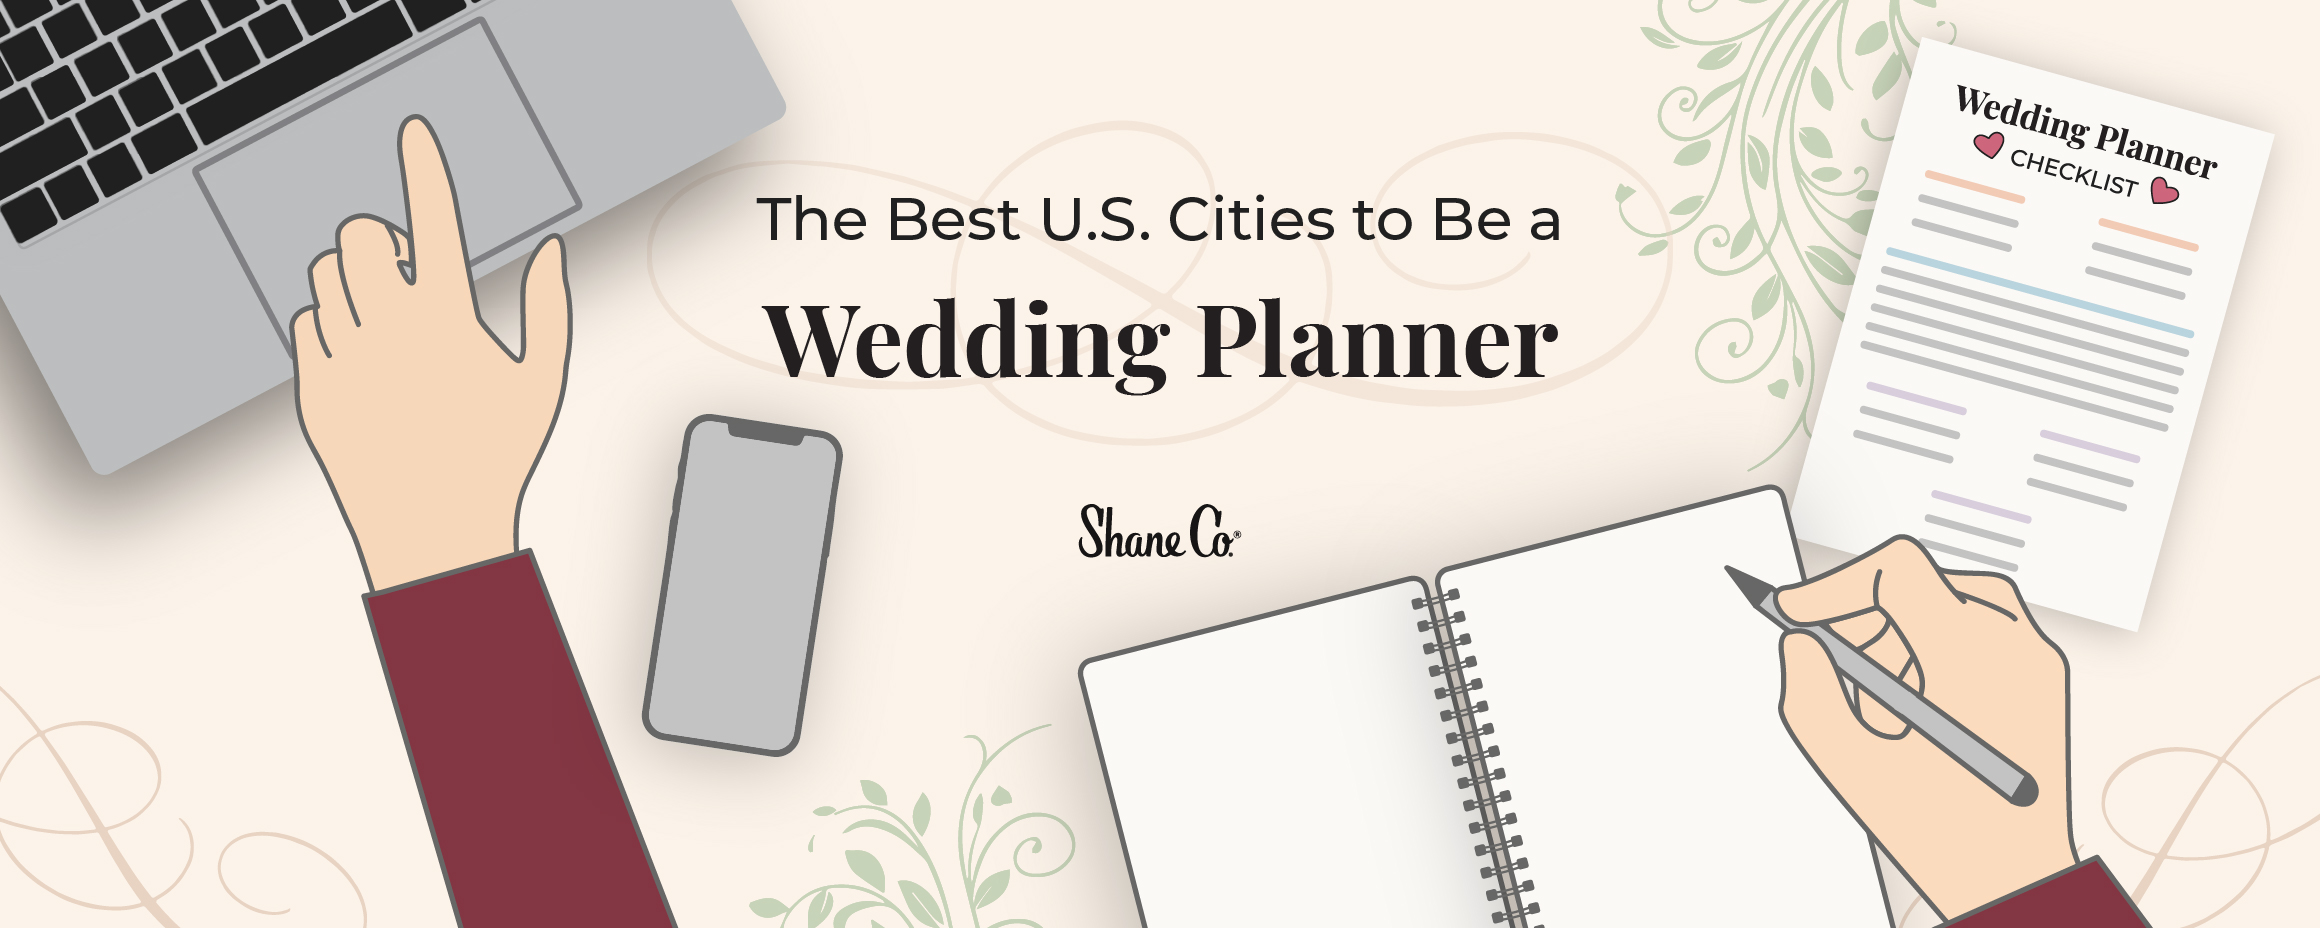  introductory graphic for a blog about the best U.S. cities to be a wedding planner